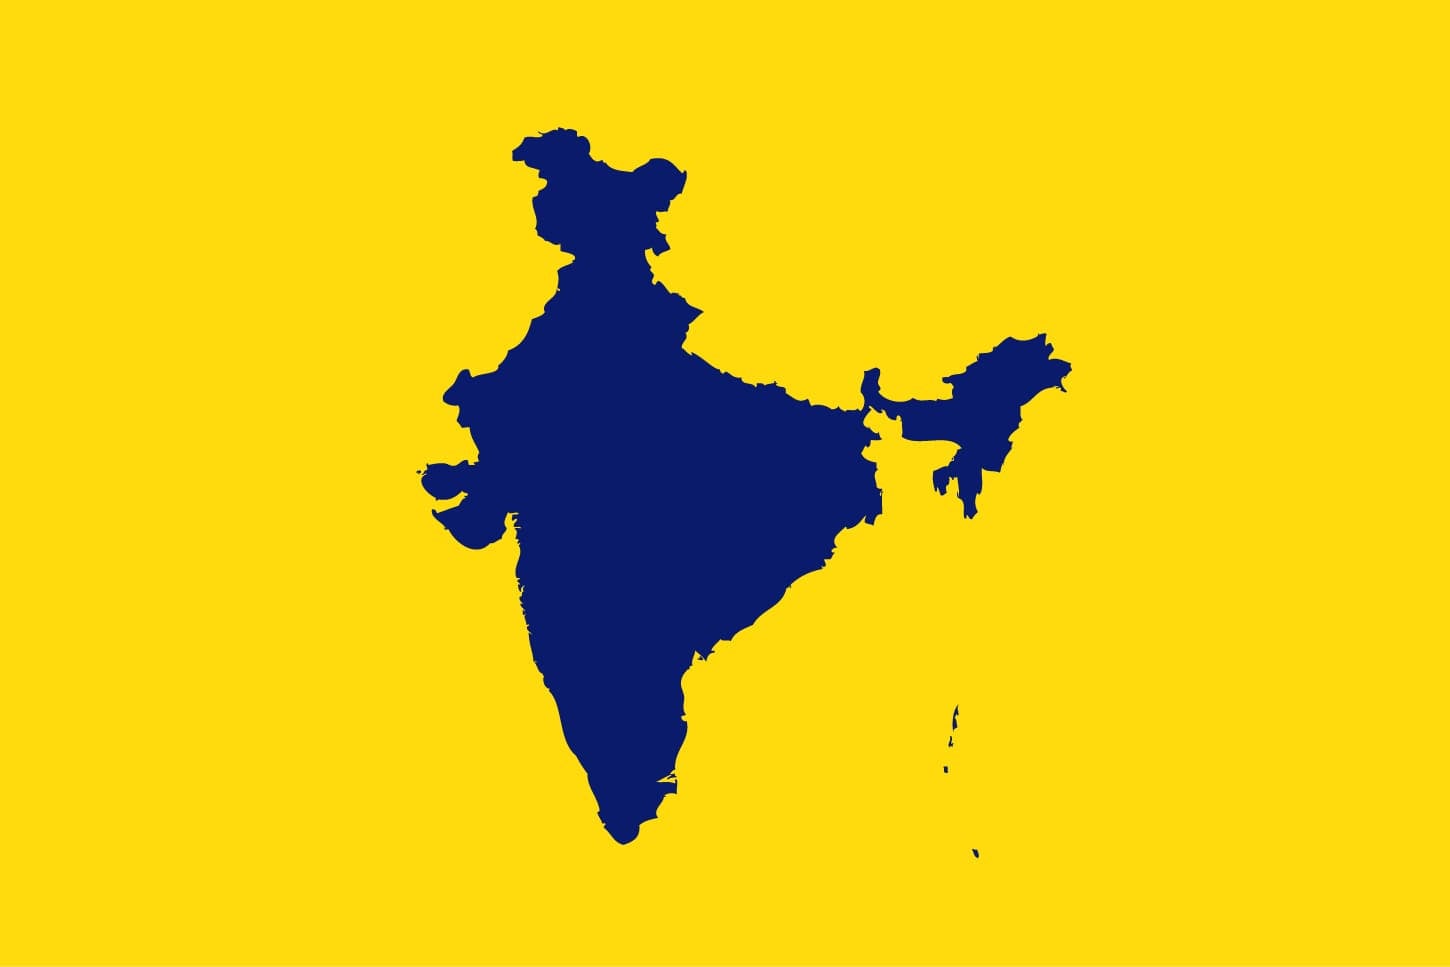 Outline of India